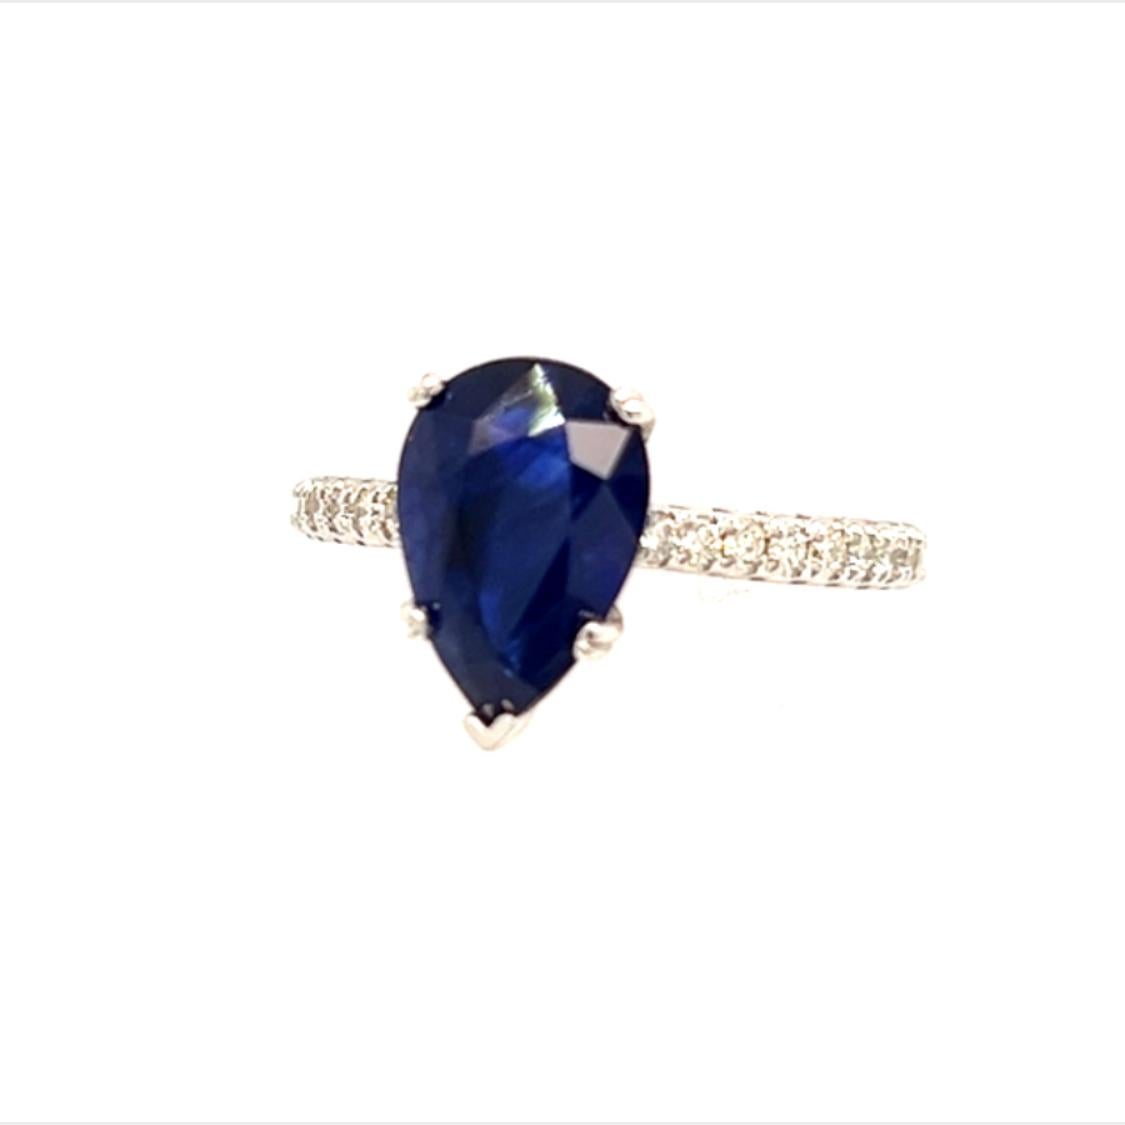 Composite Sapphire Diamond Ring Size 6.5 14k Gold 2.77 TCW Certified $2,675 215415

This is a Unique Custom Made Glamorous Piece of Jewelry!

Nothing says, “I Love you” more than Diamonds and Pearls!

This Sapphire ring has been Certified,